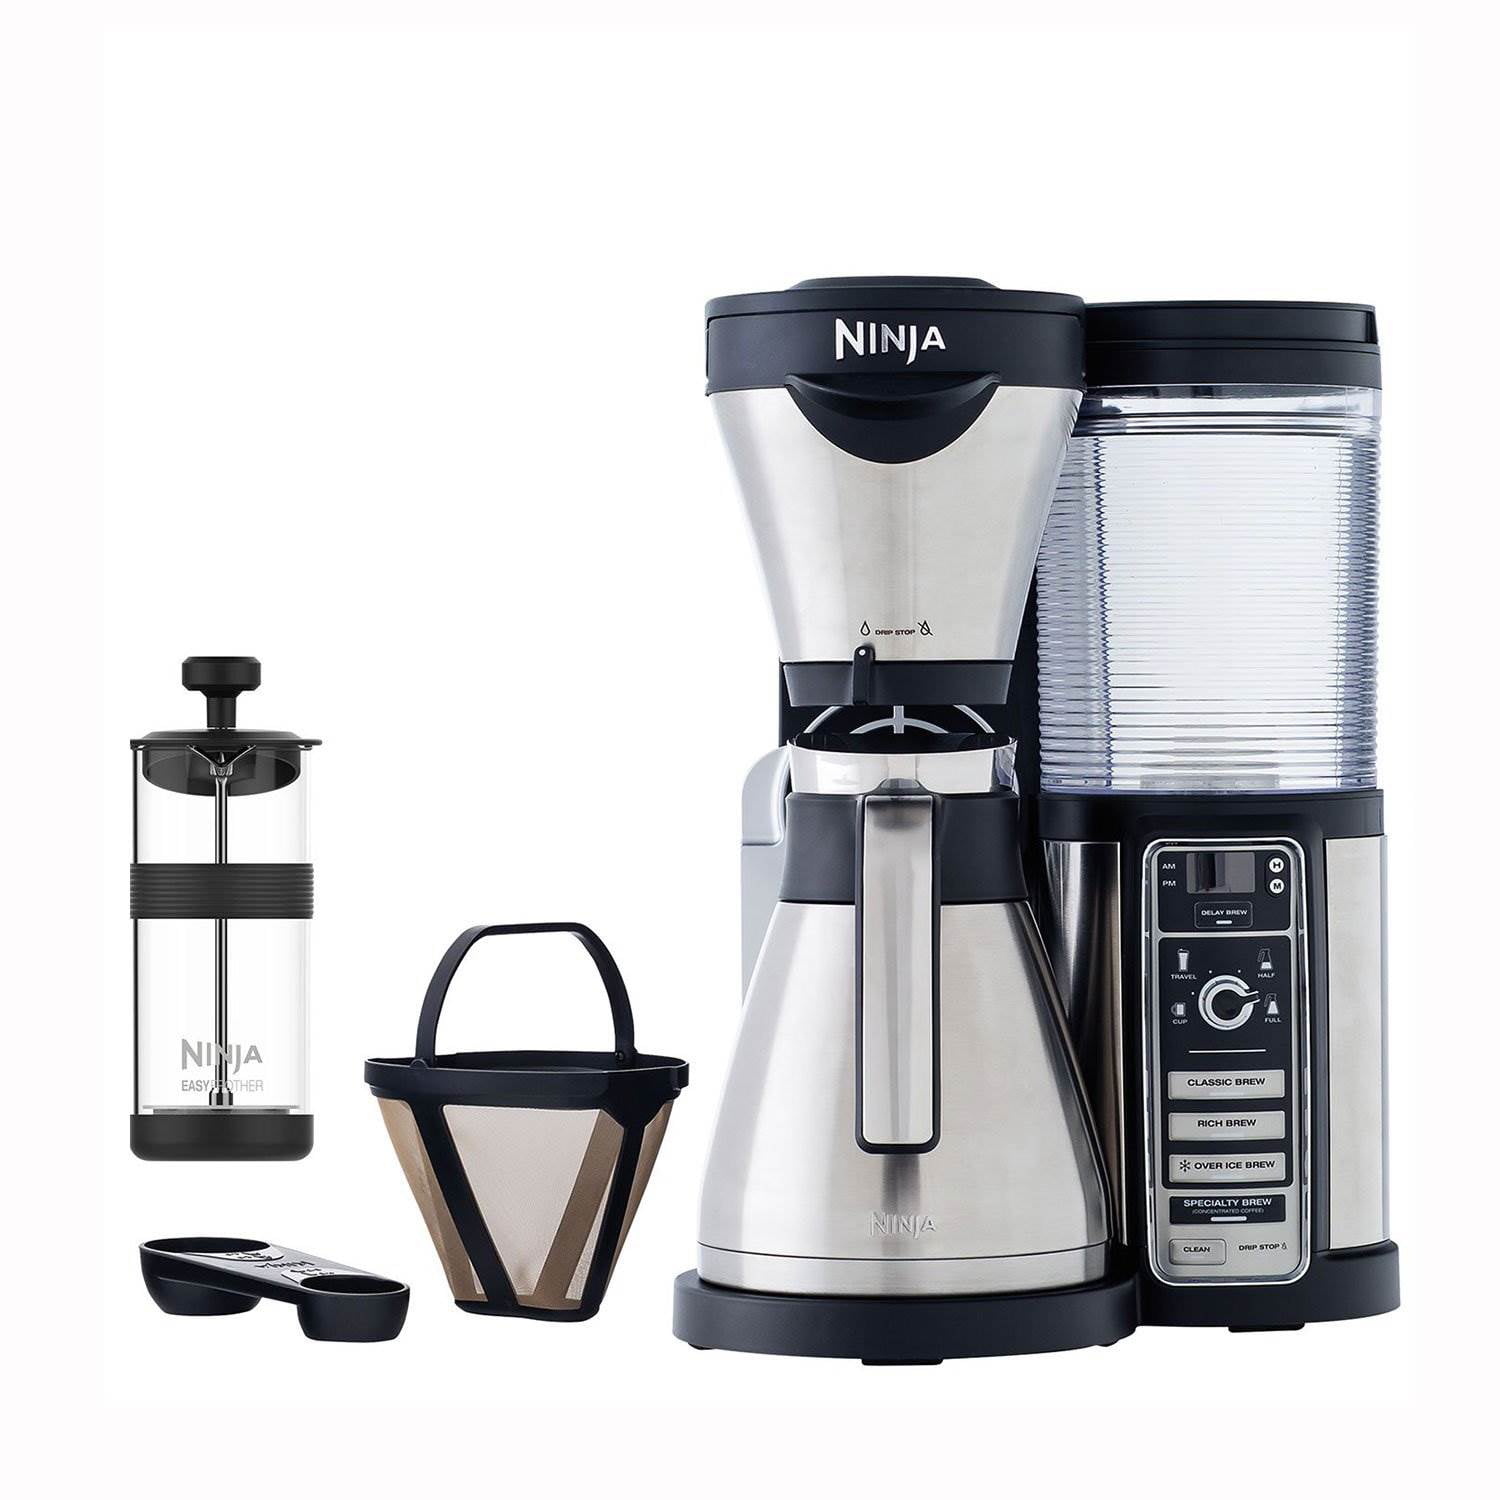 Ninja CF097 Coffee Bar Hot & Iced Coffee Maker StainlessThermal Carafe  Frother